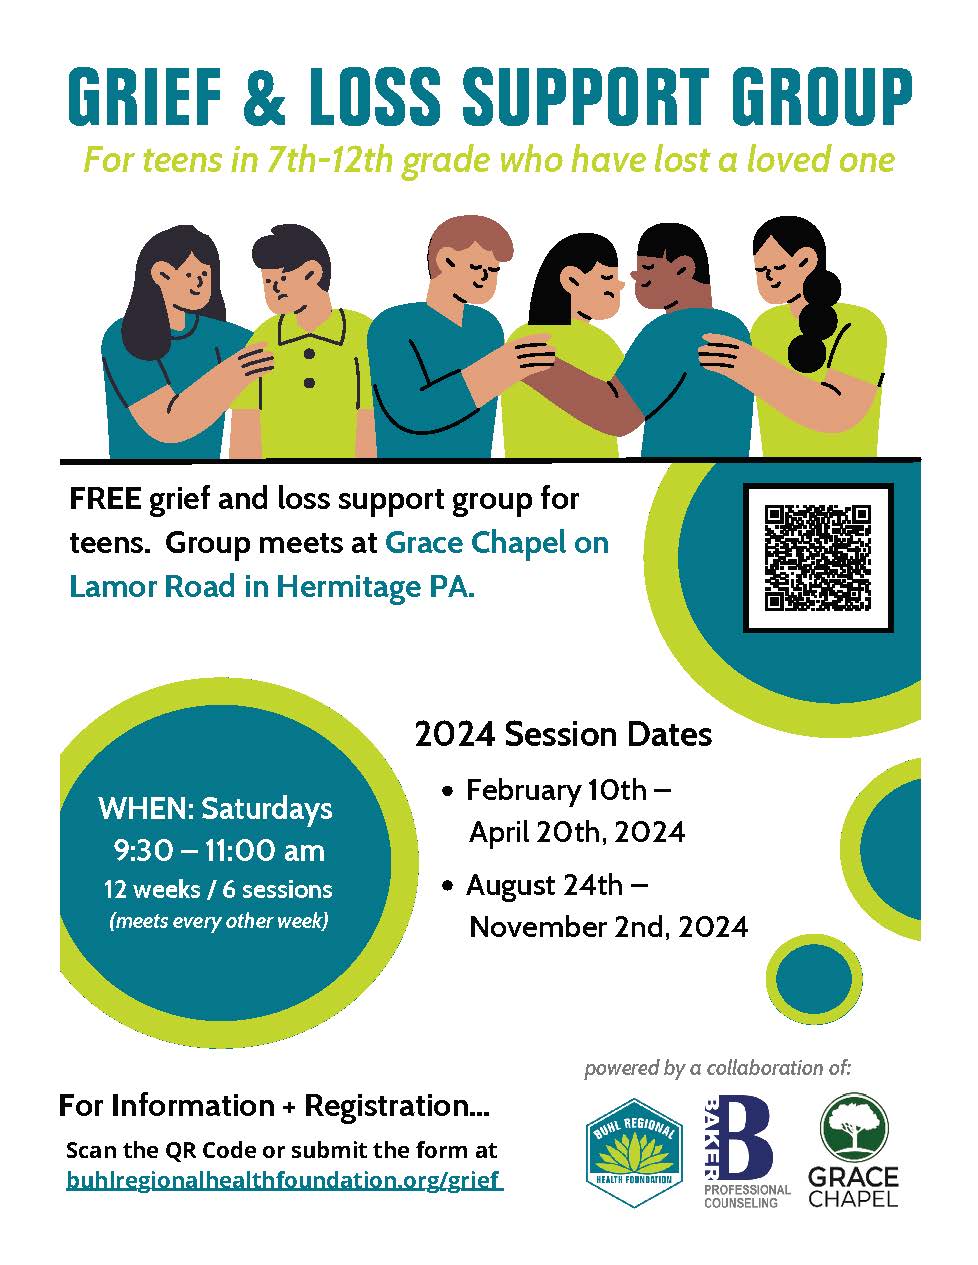 Grief & Loss Support Group Flyer
